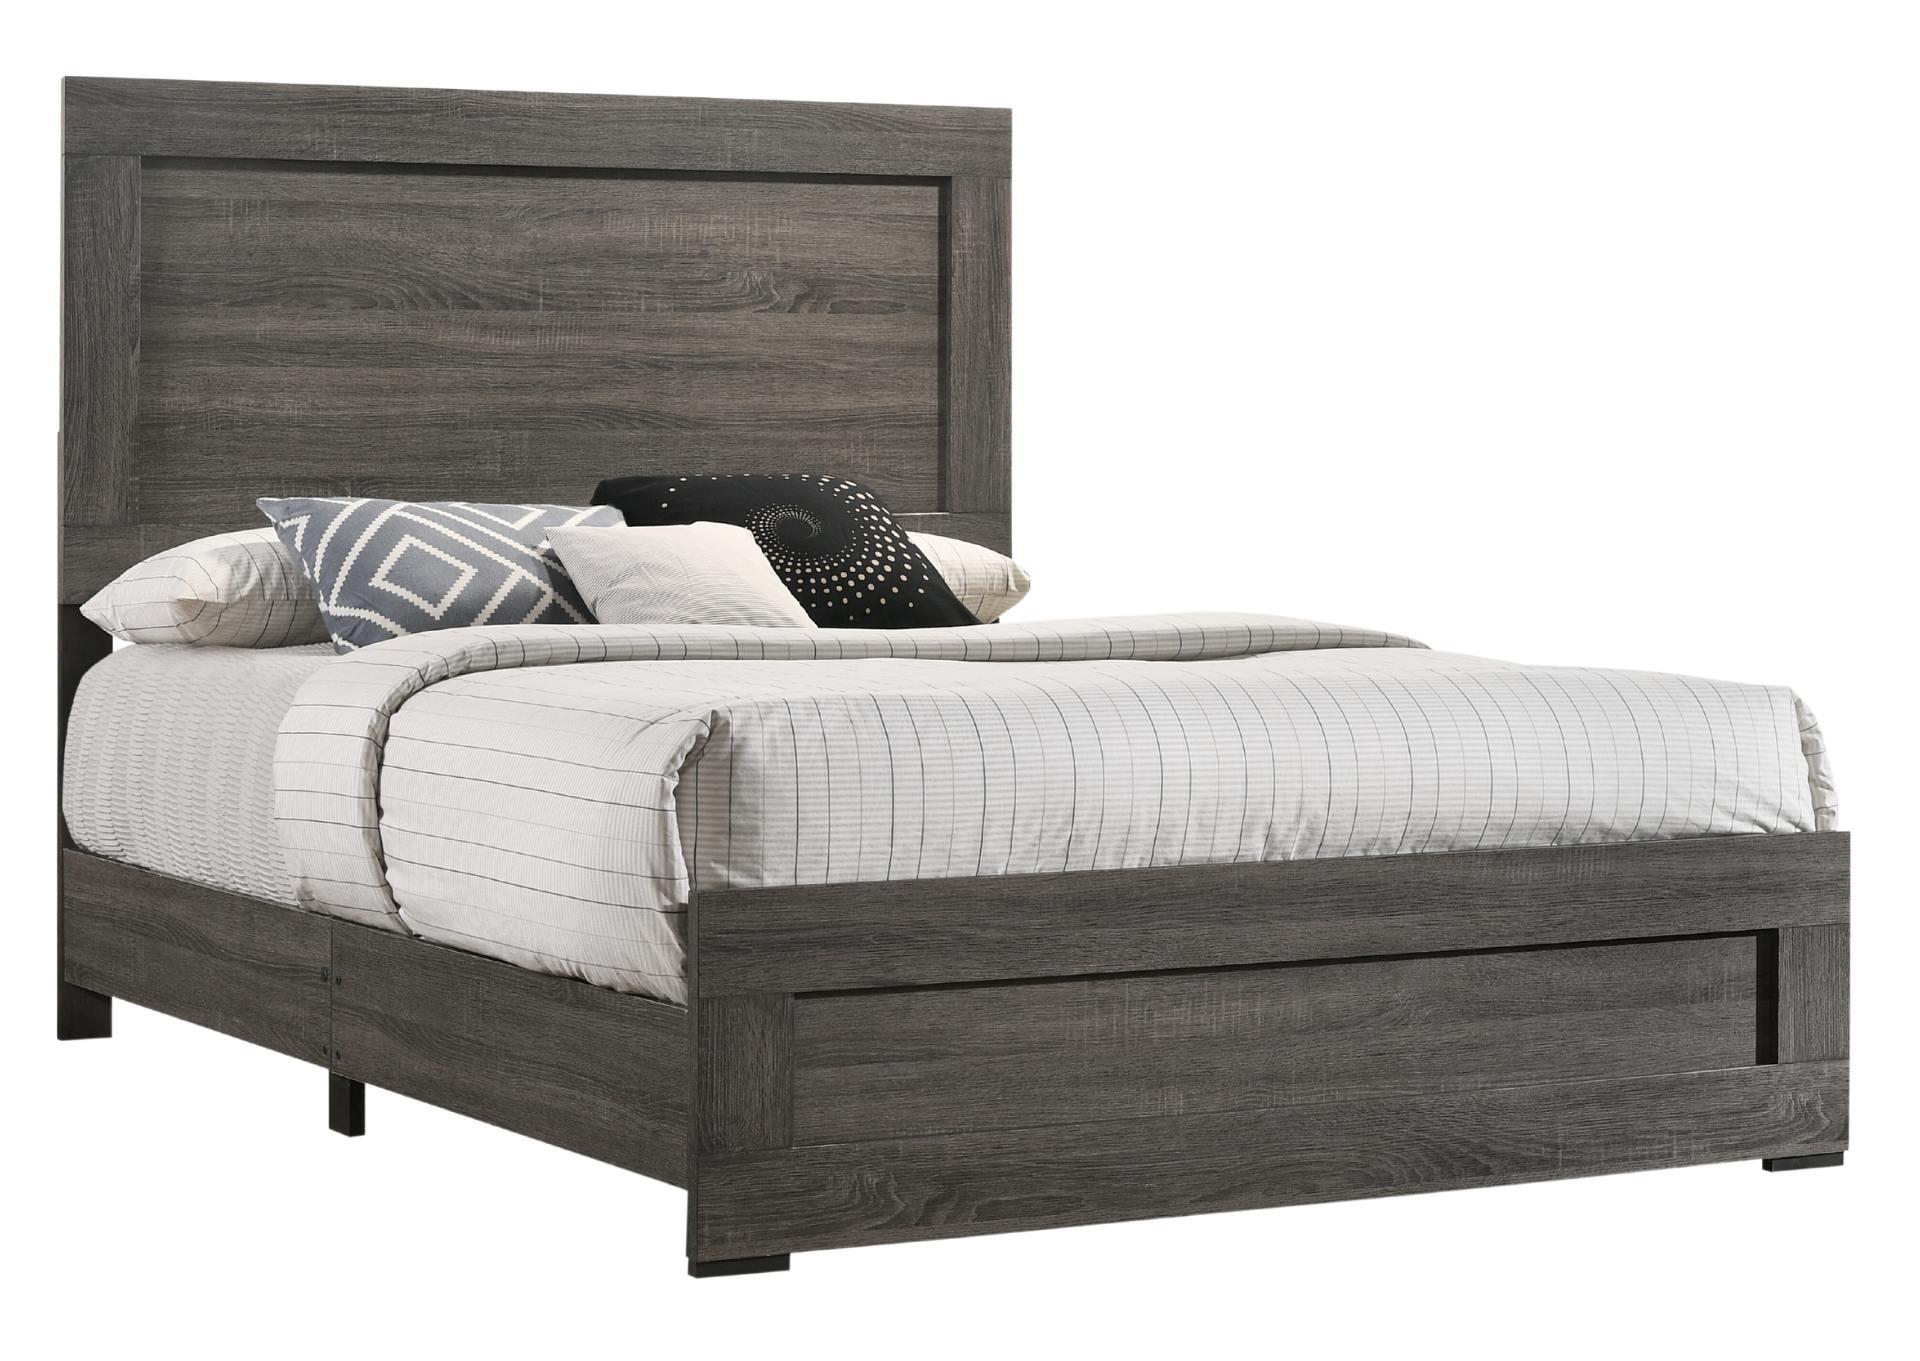 AMELIE GREY KING BED,LIFESTYLE FURNITURE